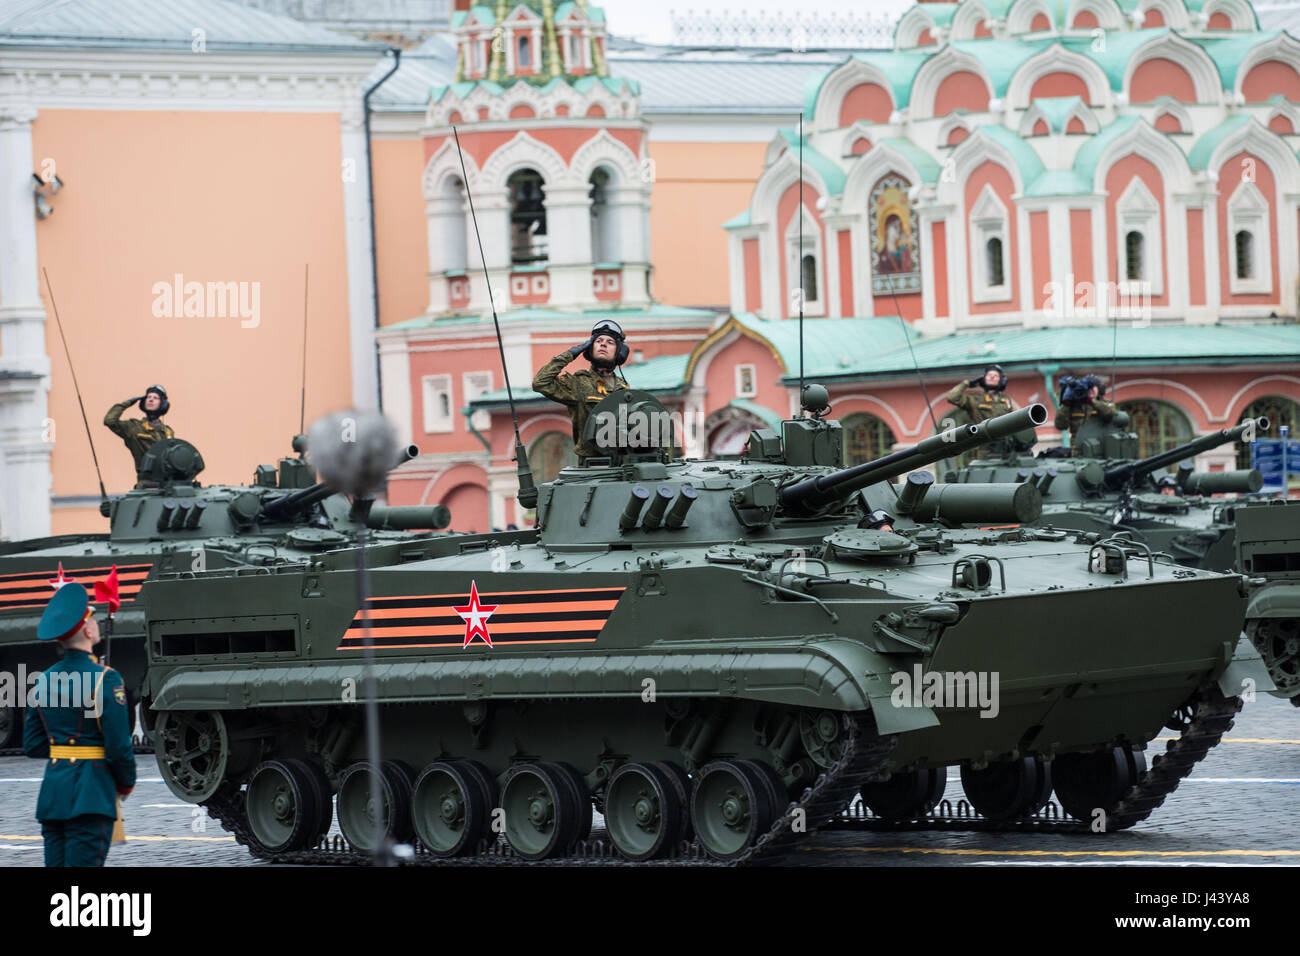 Moscow, Russia. 9th May, 2017. Soldiers salute on tanks during the Victory Day parade in Moscow, Russia, May 9, 2017. Russia marks on Tuesday the 72nd anniversary of the victory over Nazi Germany in World War II. Credit: Wu Zhuang/Xinhua/Alamy Live News Stock Photo